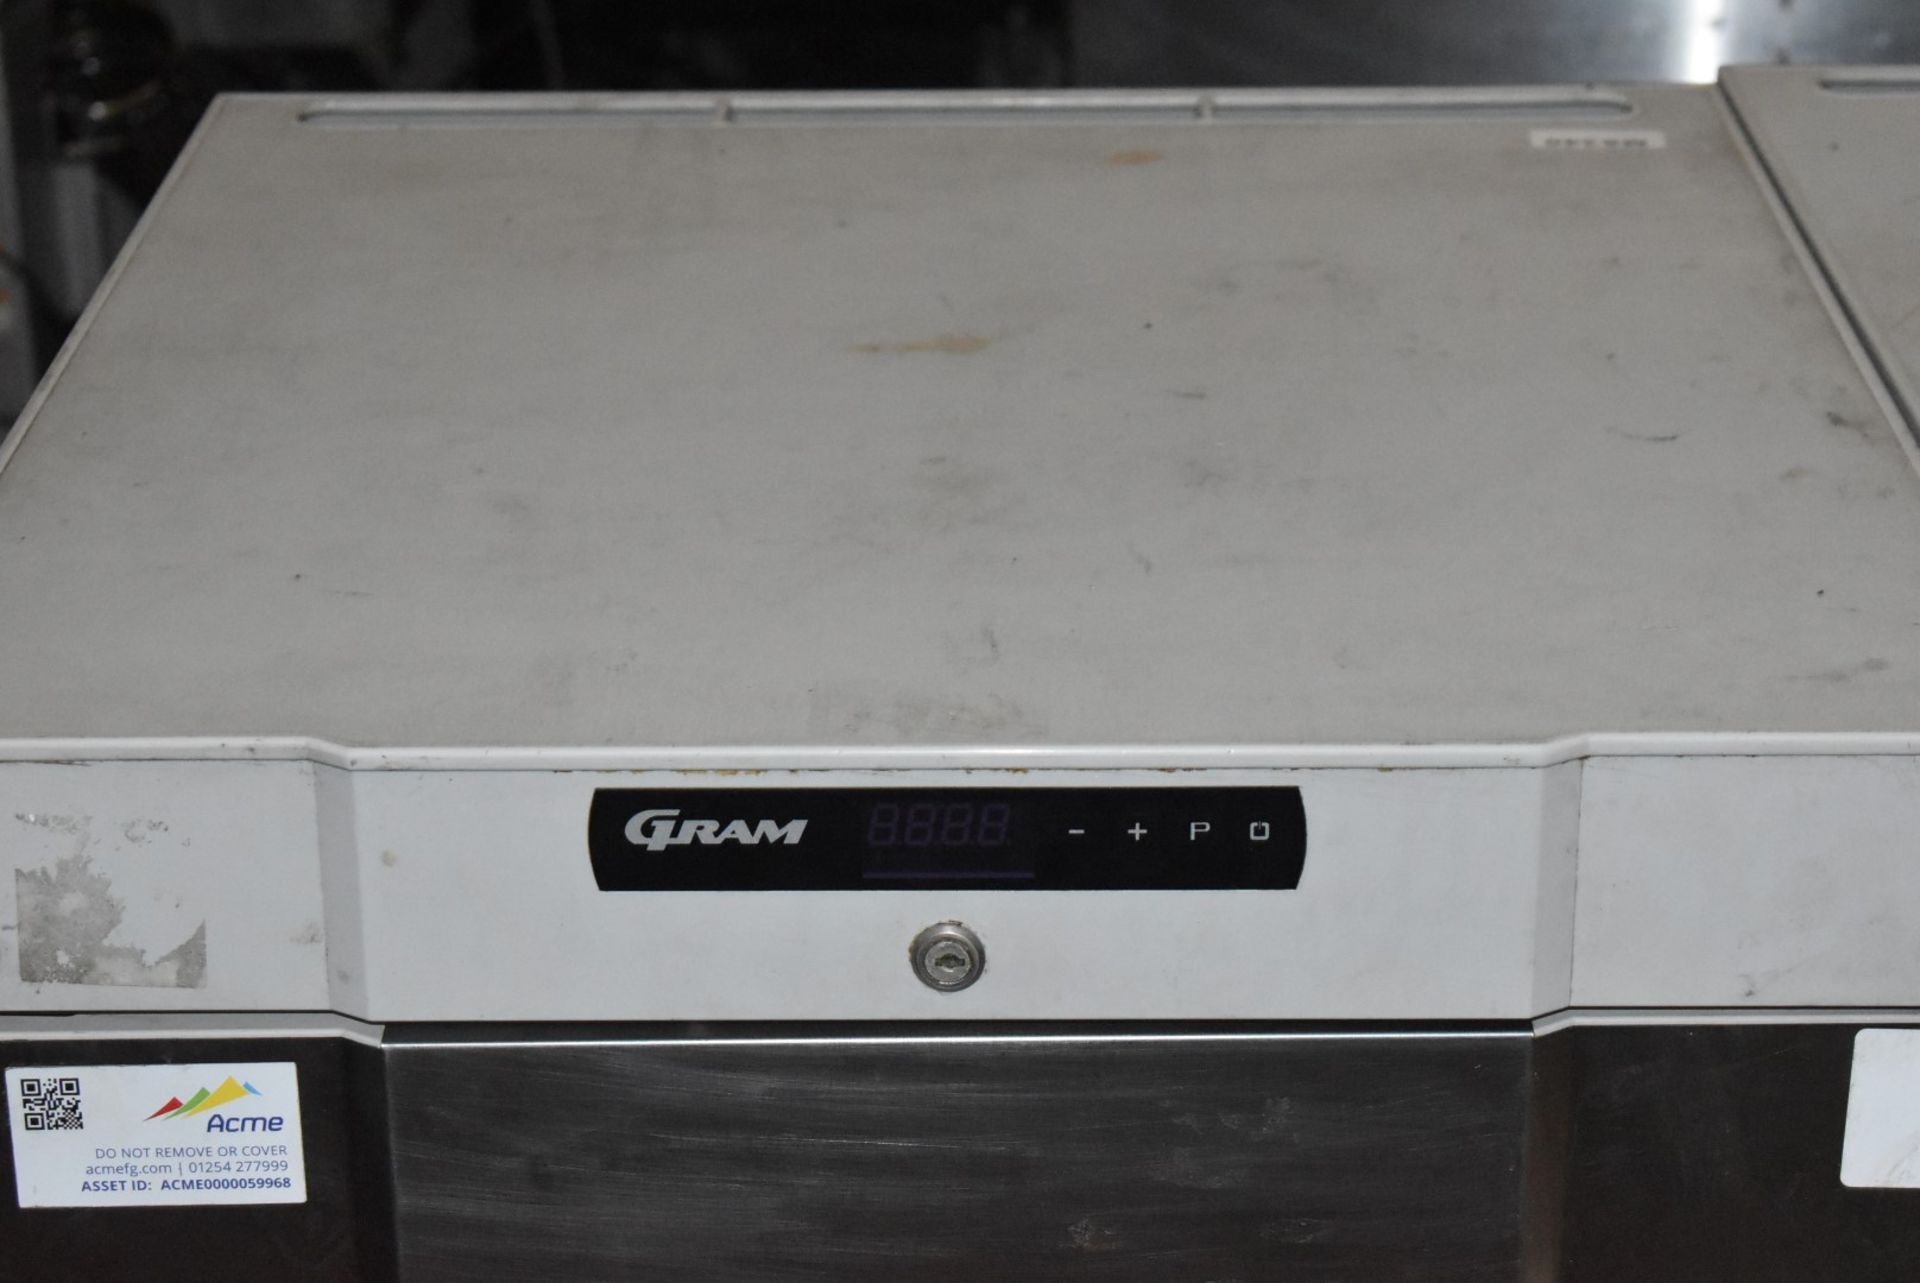 2 x Gram F 210 RG 3N 125 Ltr Undercounter Freezers - Recently Removed From a Restaurant - Image 3 of 8